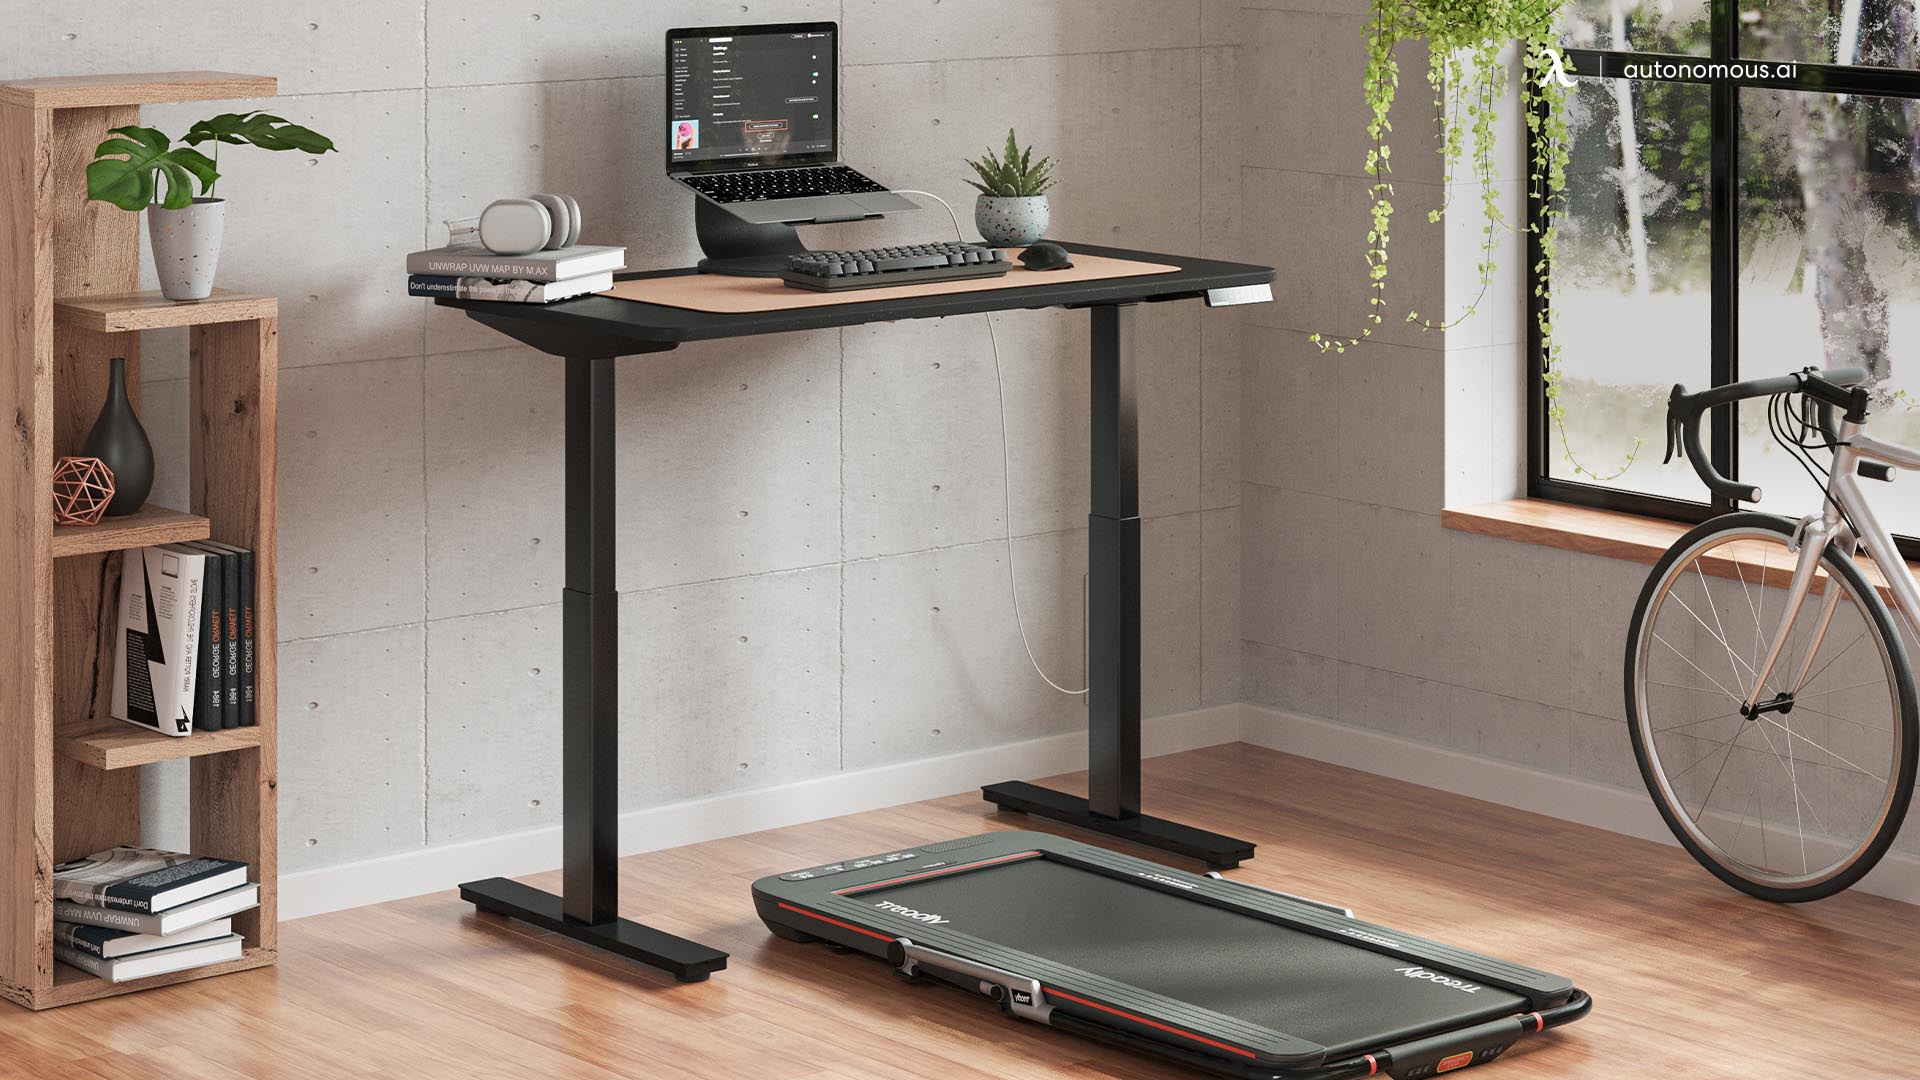 Circulation is improved with diy treadmill desk